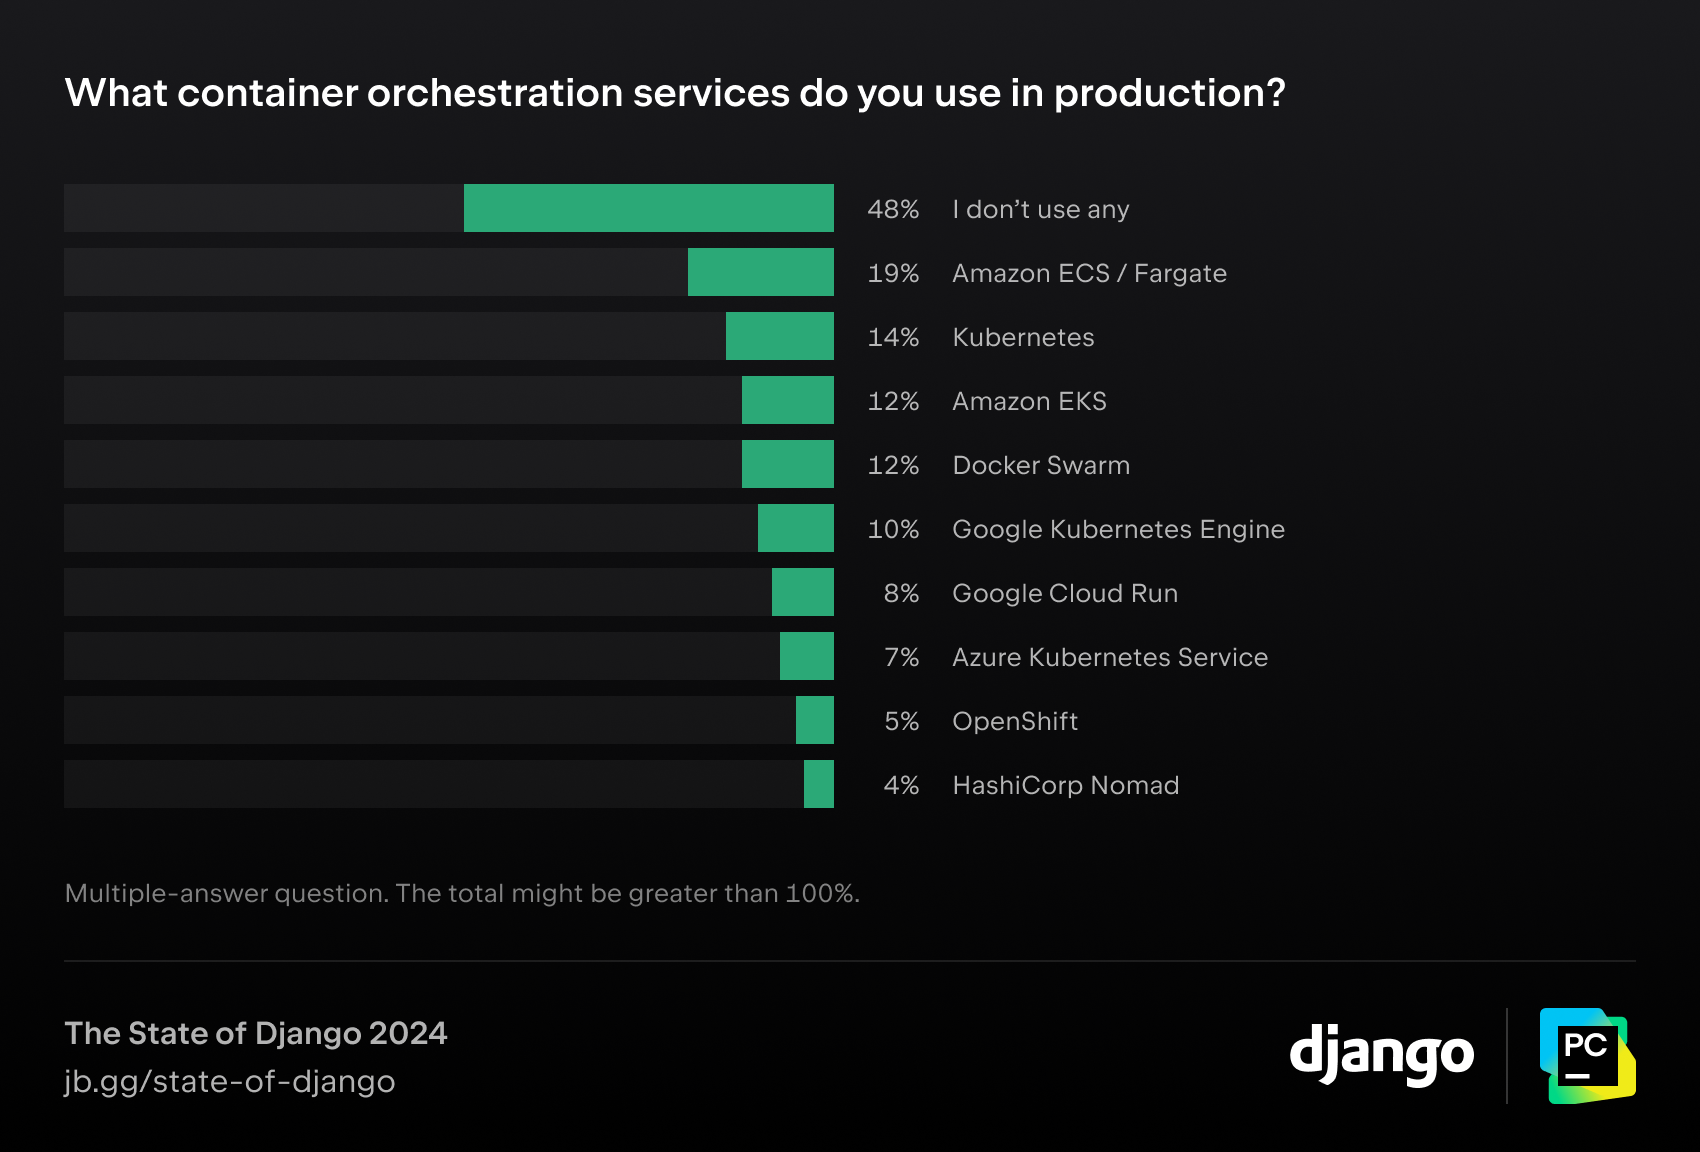 What container orchestration services do you use in production?